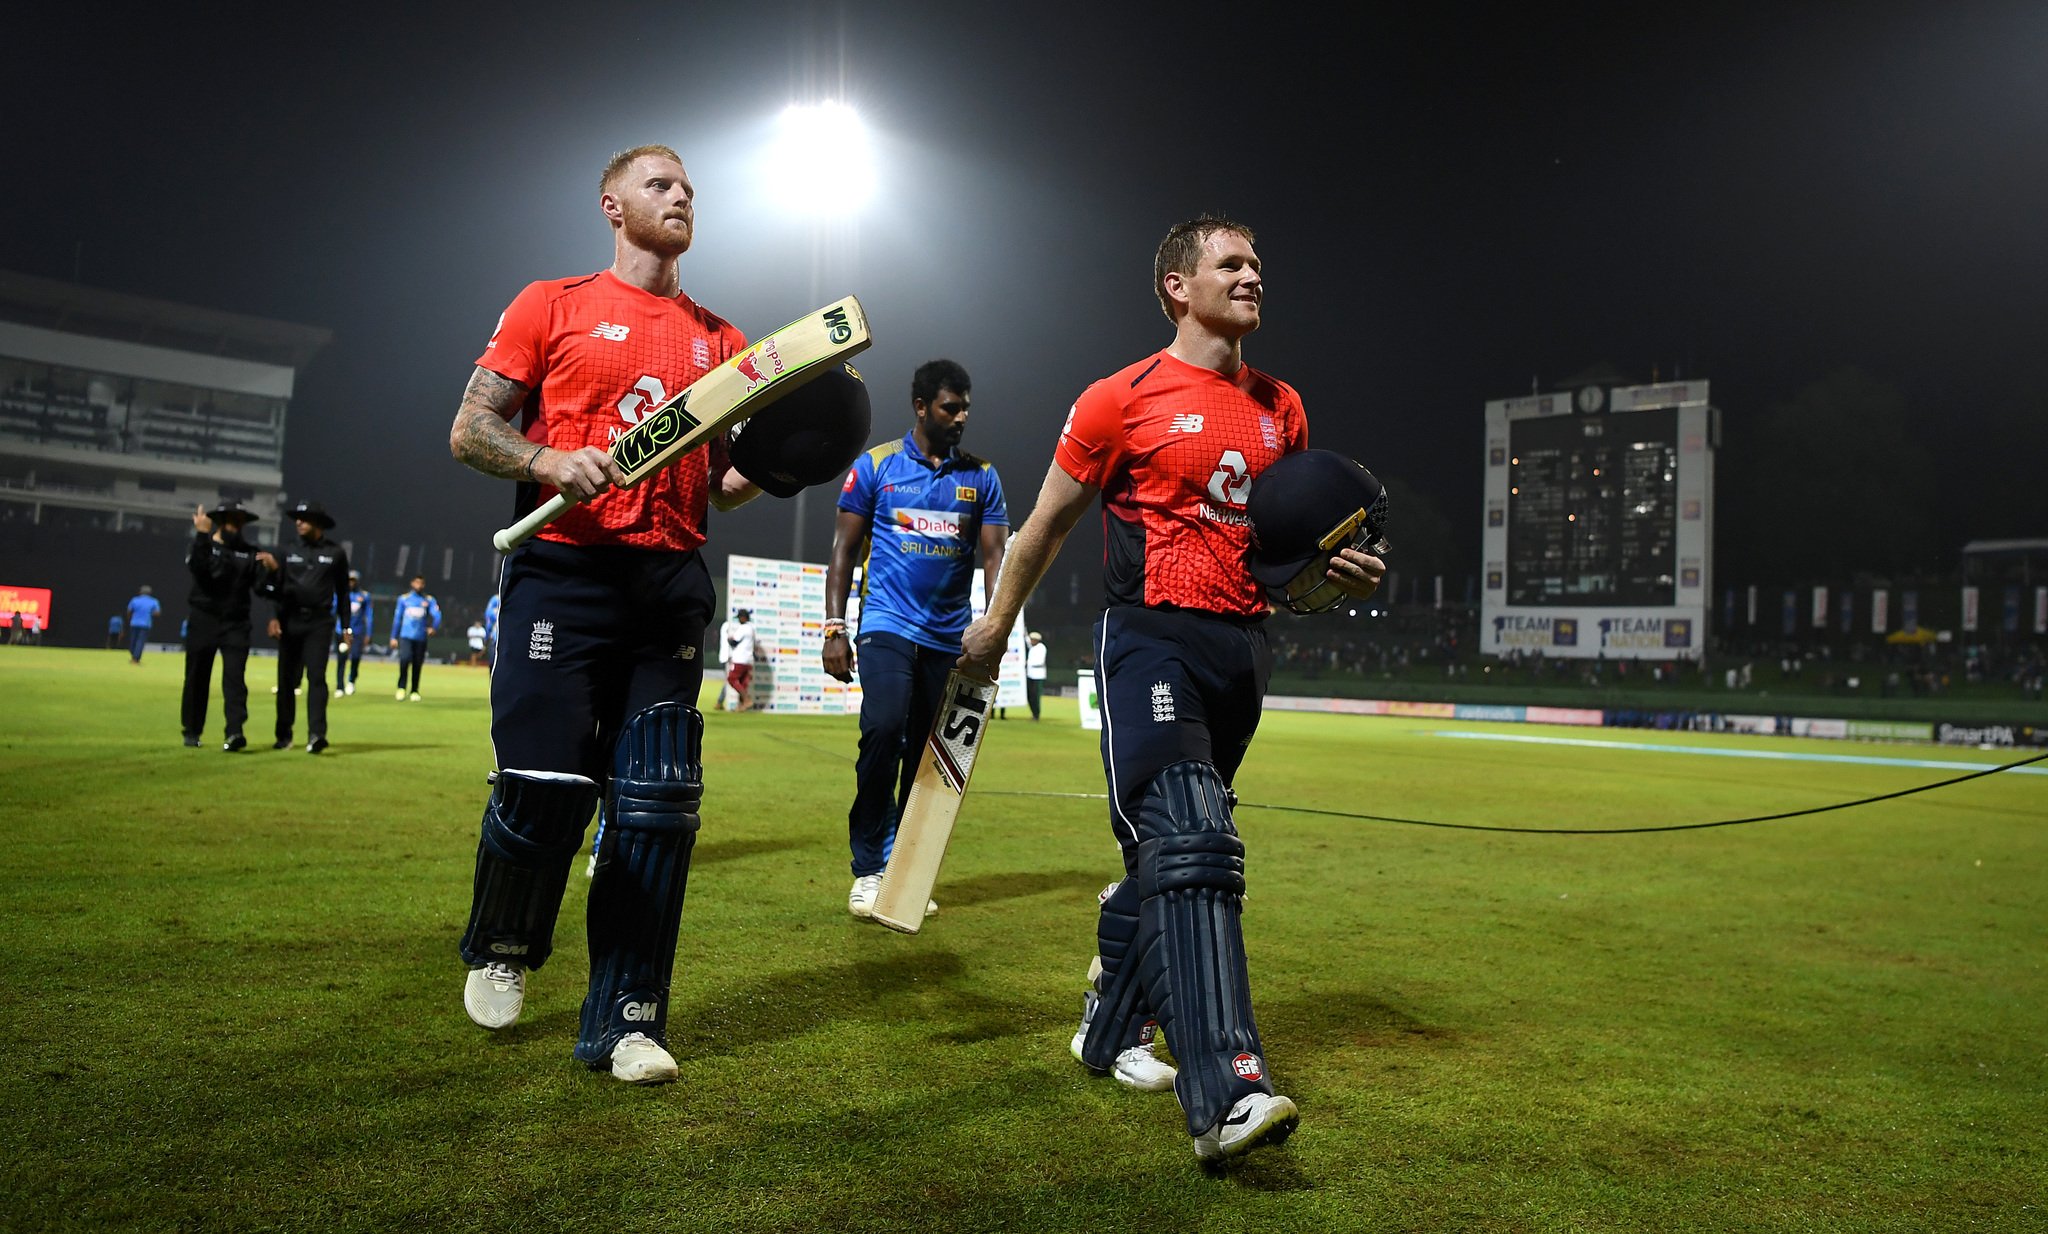 KANDY, SRI LANKA - OCTOBER 17:  England captain Eoin Morgan and Ben Stokes leave the field after winning the 3rd One Day International match between Sri Lanka and England at Pallekele Cricket Stadium 